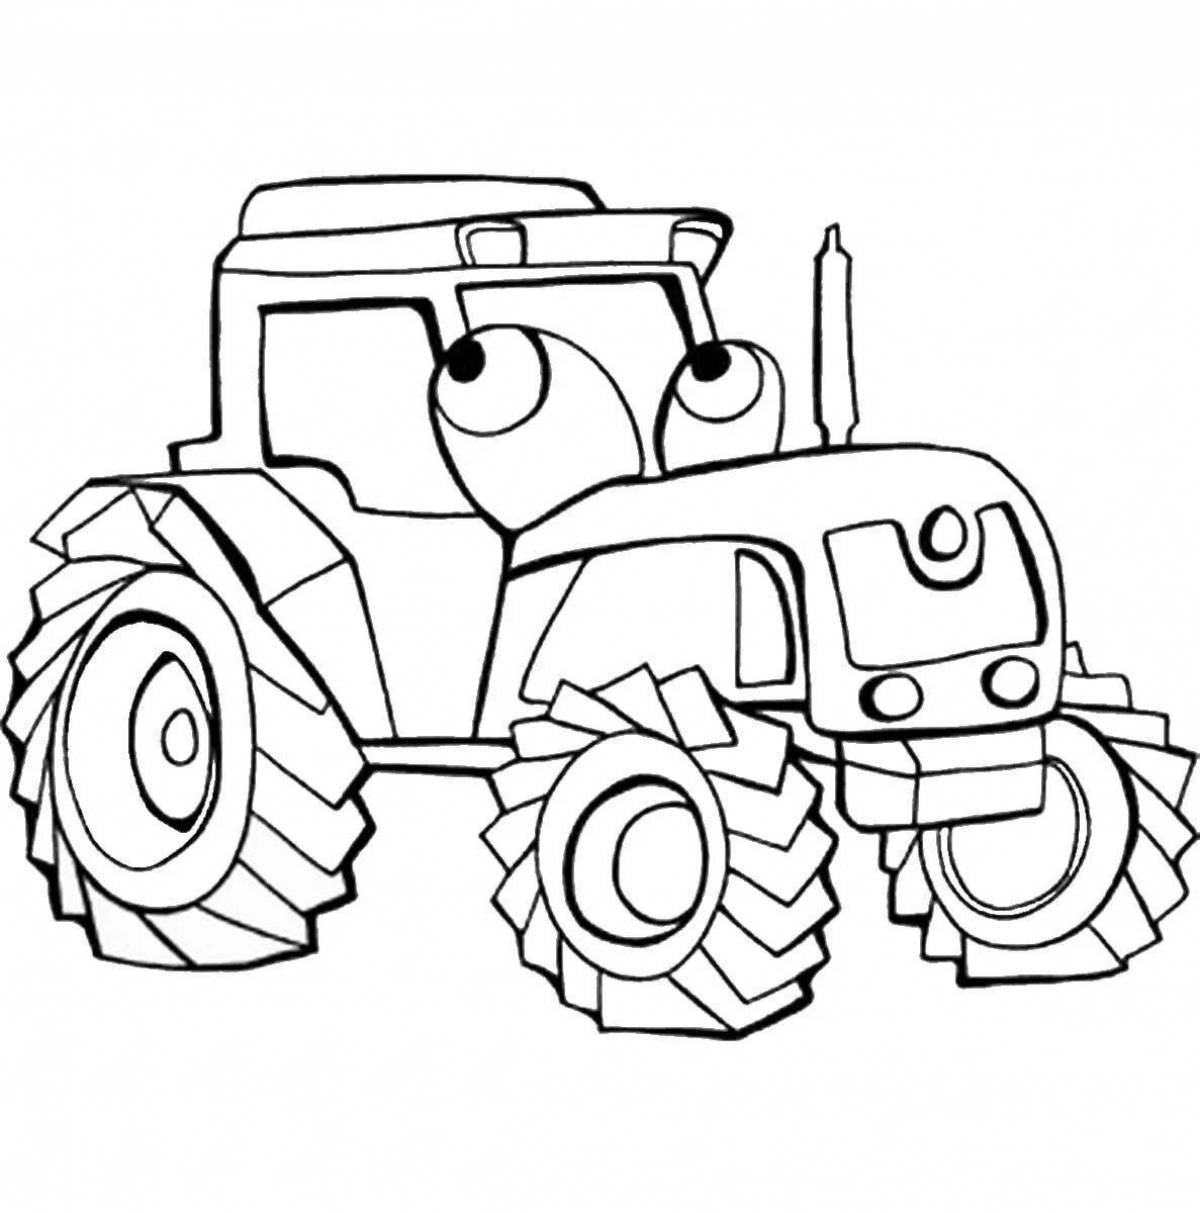 Bright drawing of a tractor